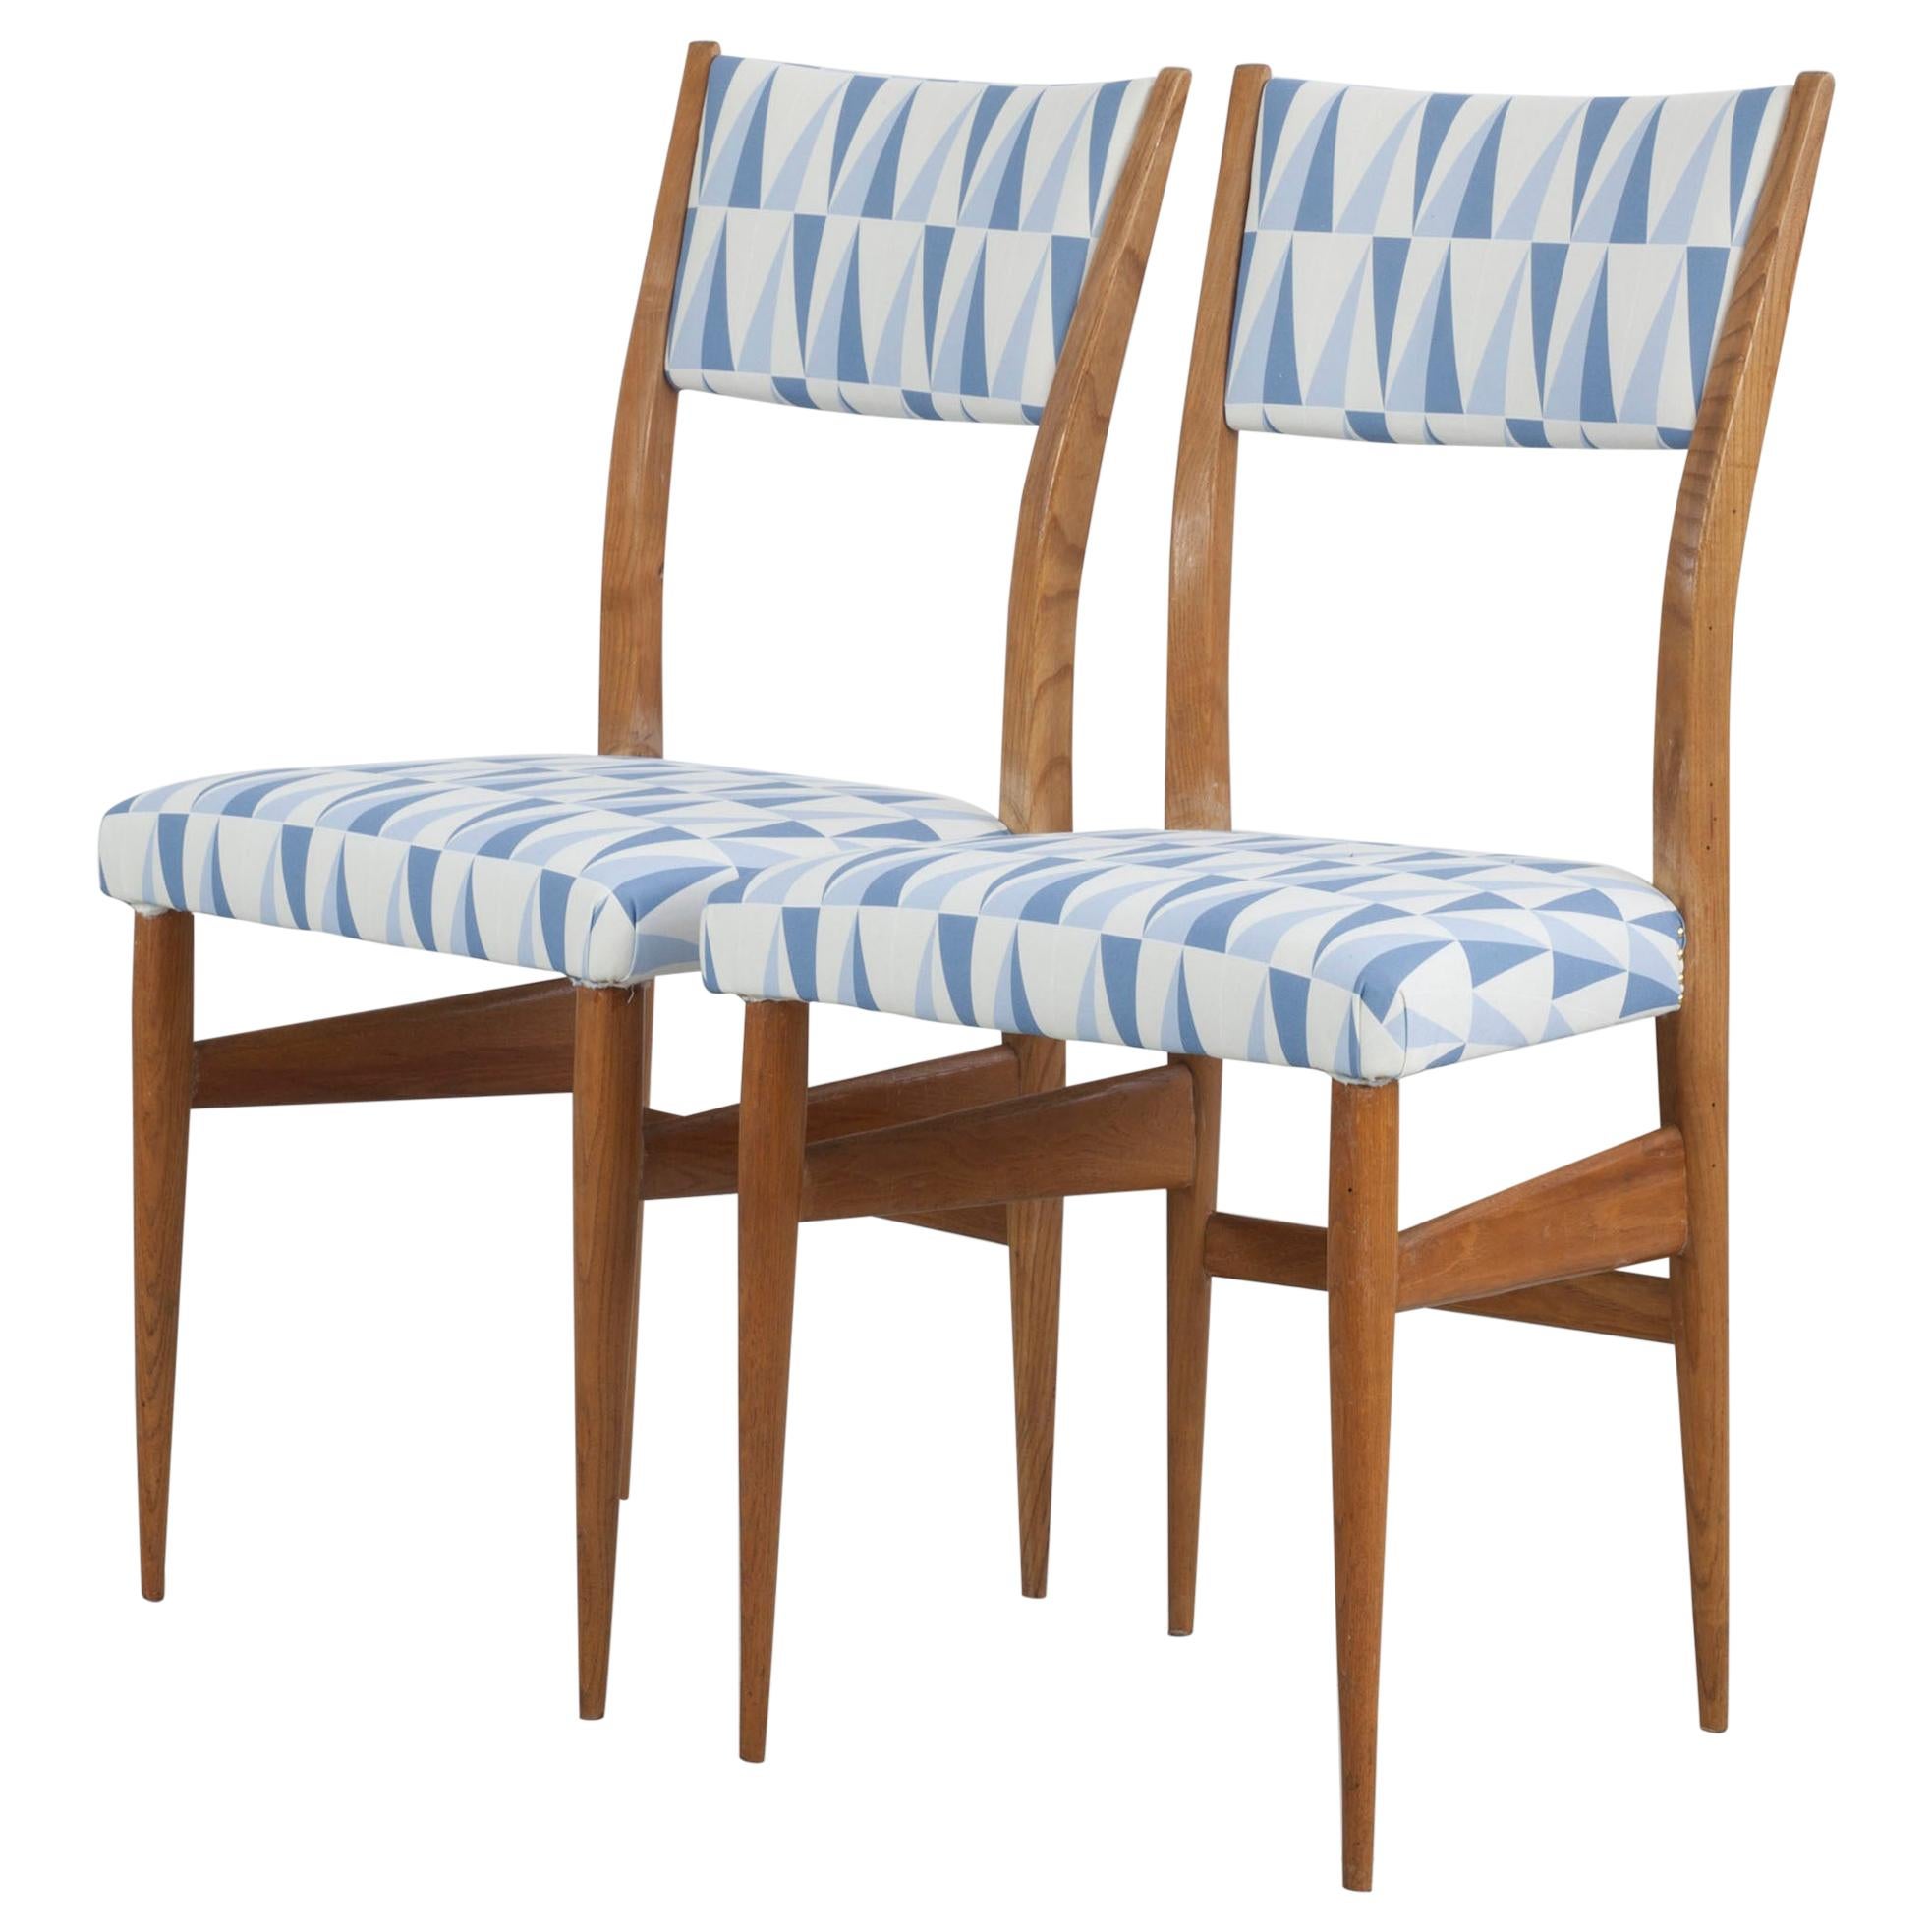 Set of 2 Maple Chairs with Upholstery Fabric "Gio Ponti", Italy, 1950s